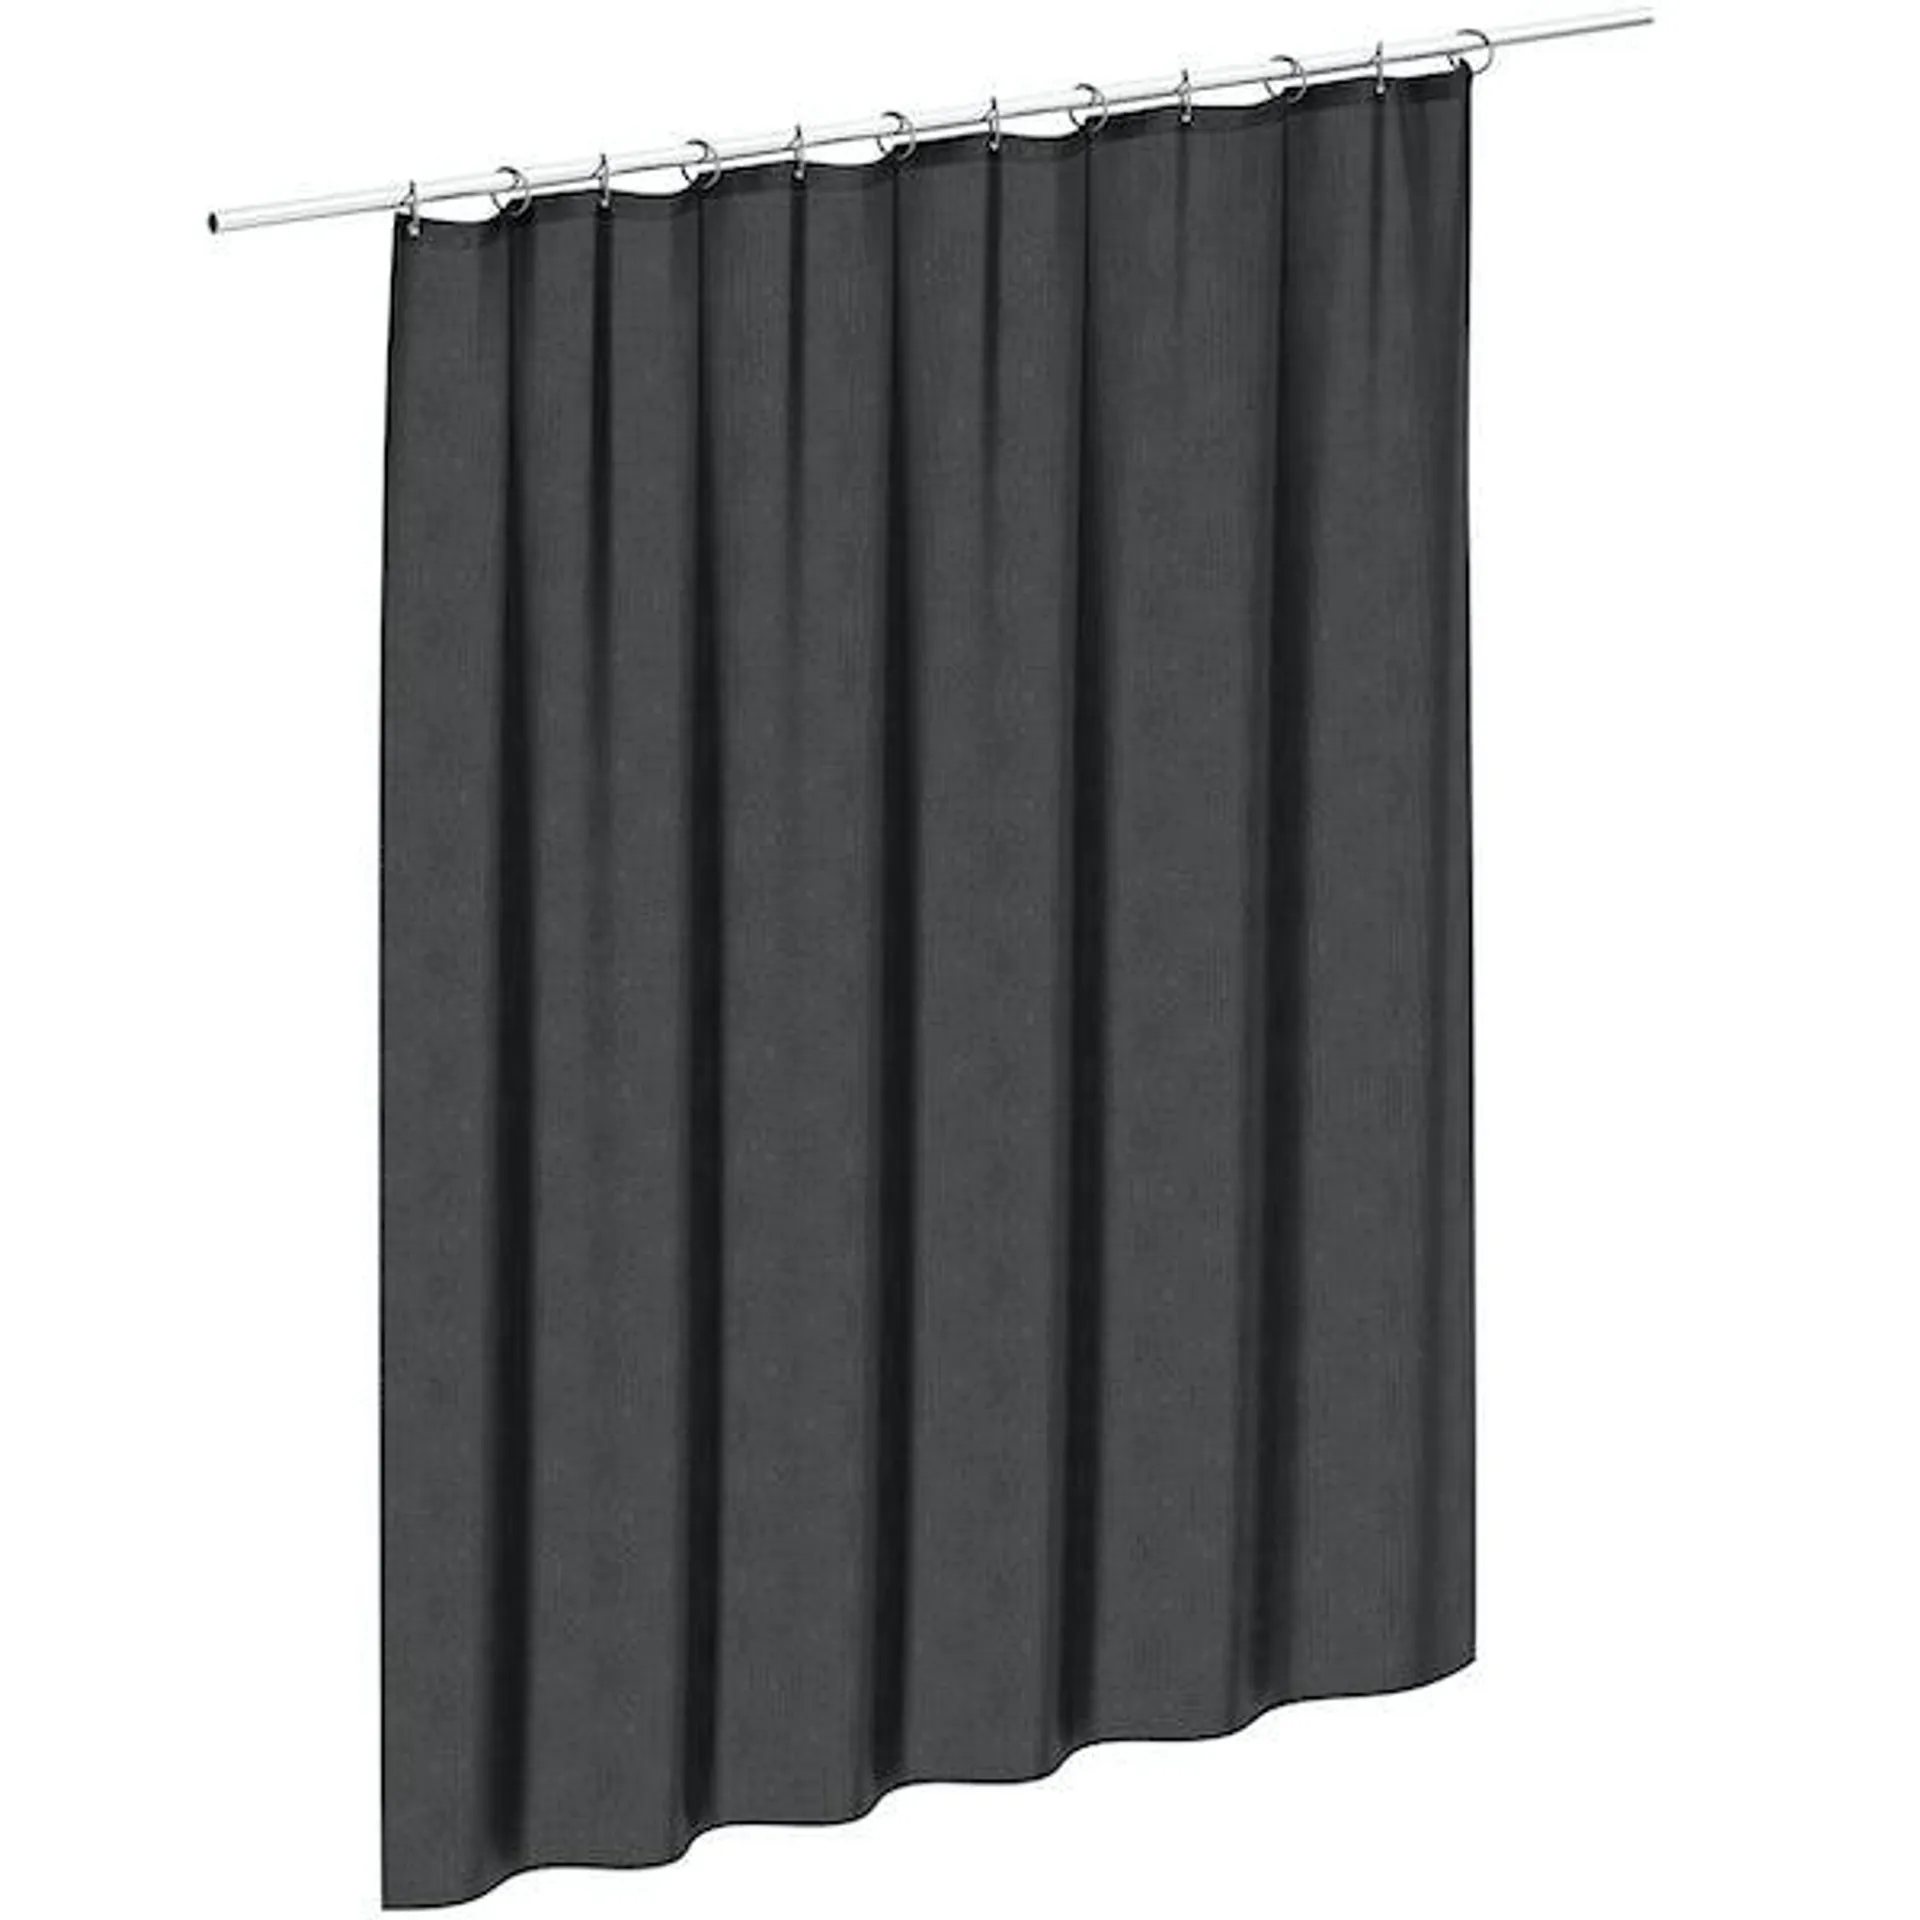 Accents black shower curtain